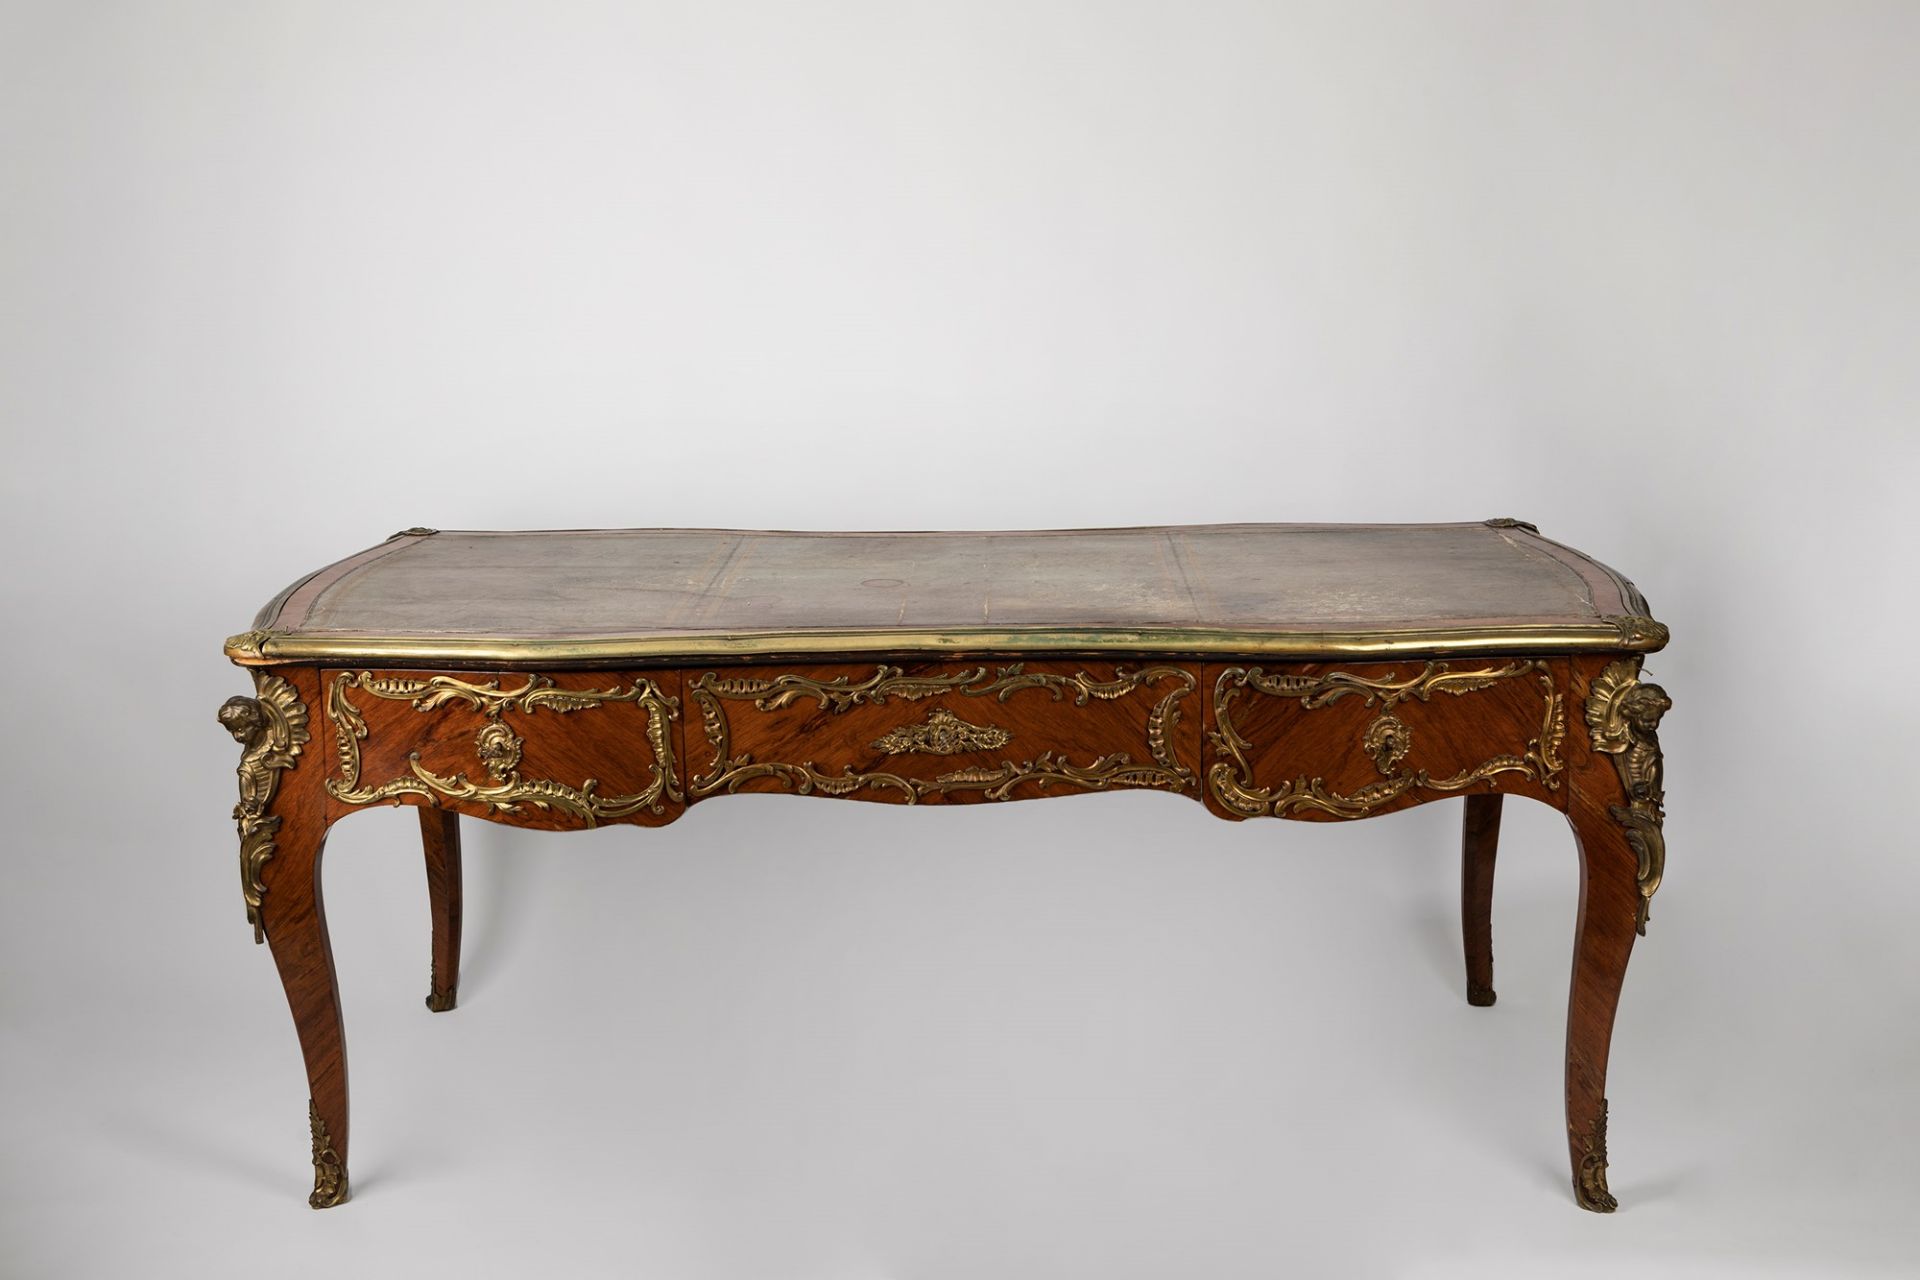 Large "diplomatic" desk France, second half of the 19th century